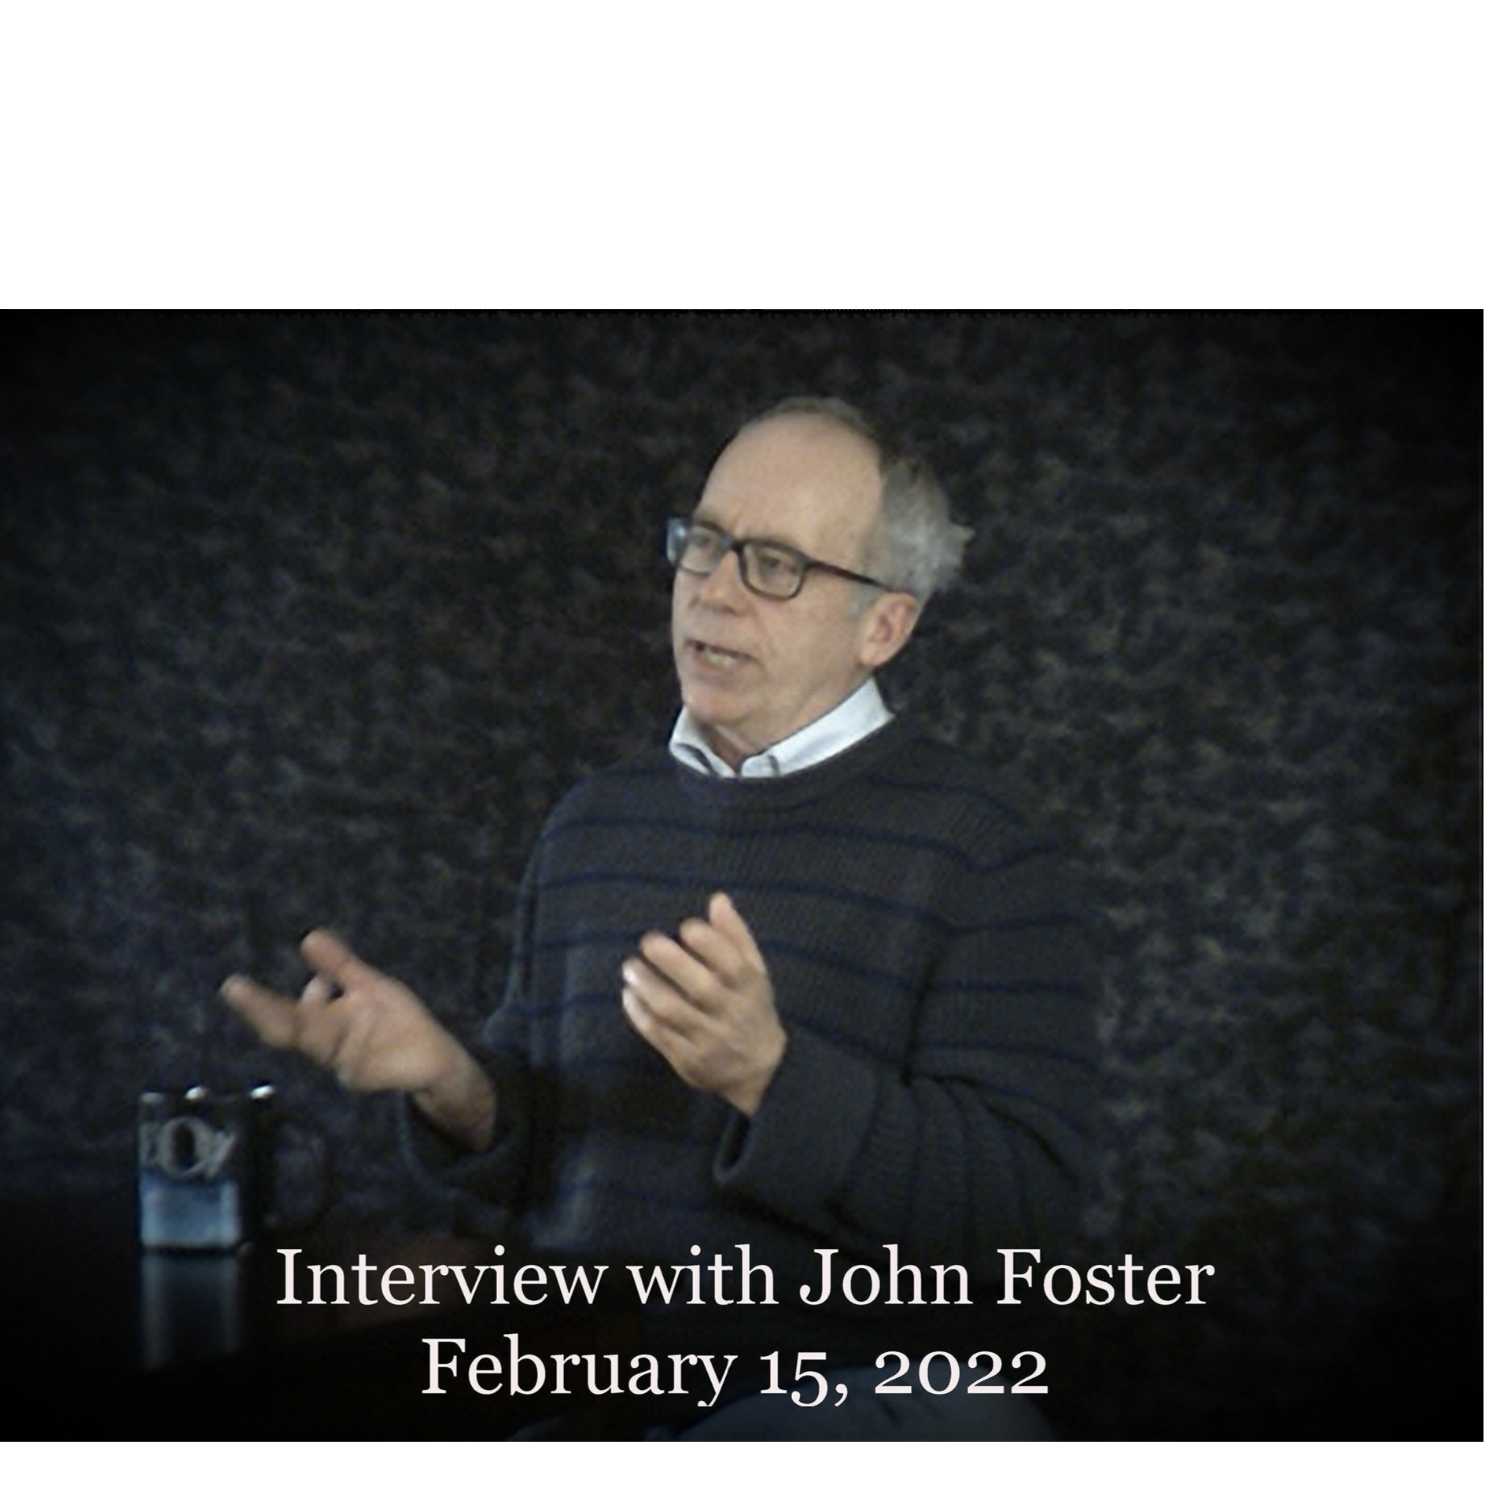 Interview with John Foster Feb 15, 2022